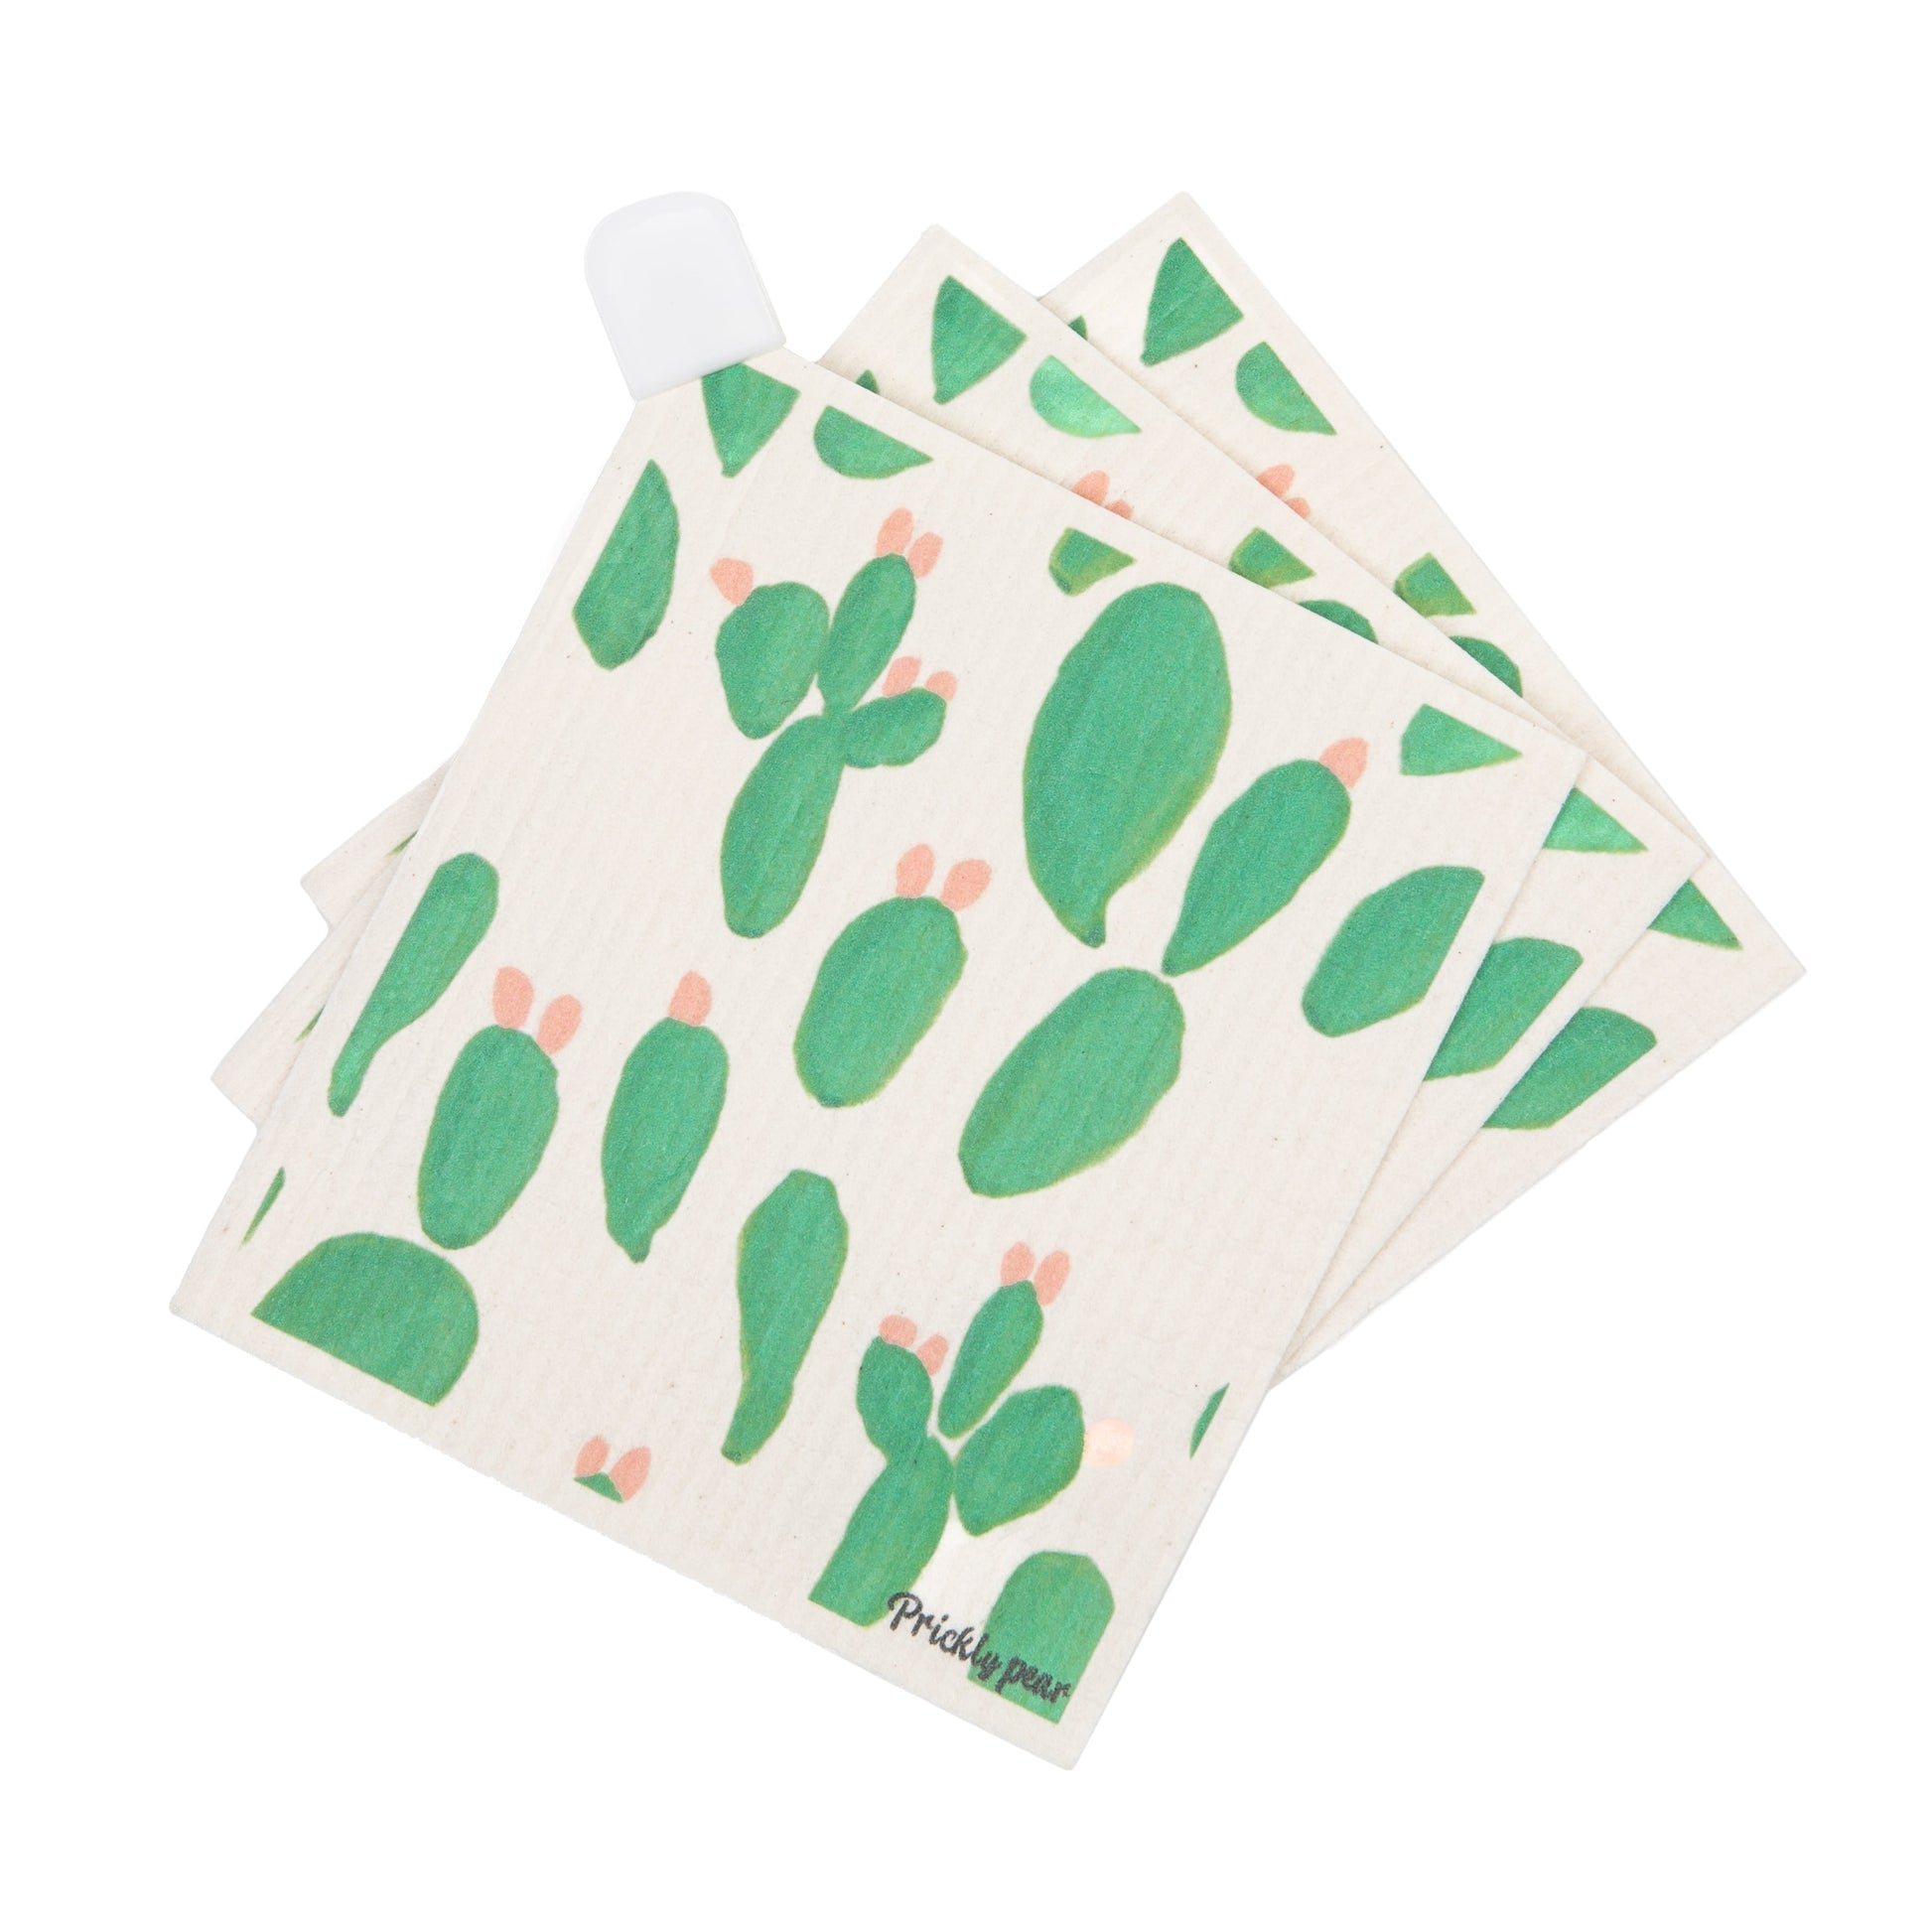 Prickly Pear Reusable Paper Towel 3 pack small 